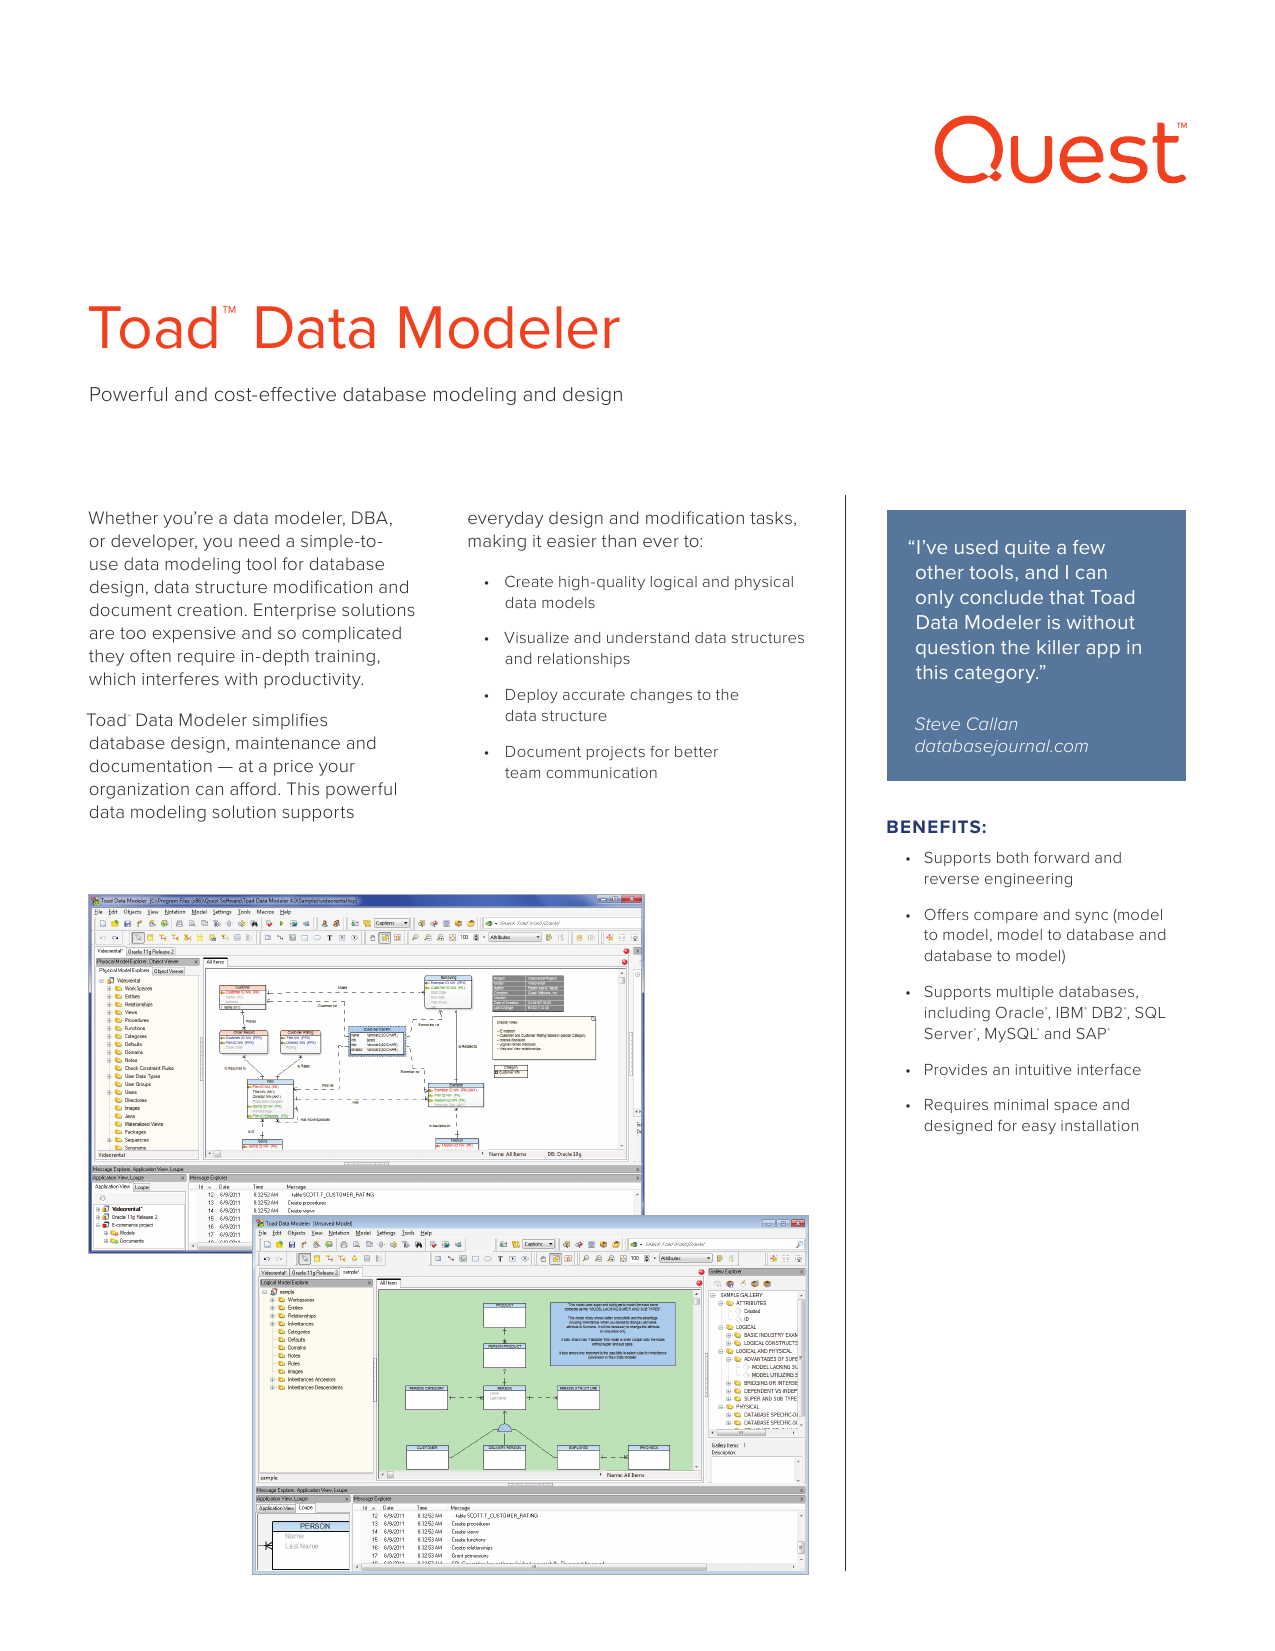 dell toad data modeler software requirements